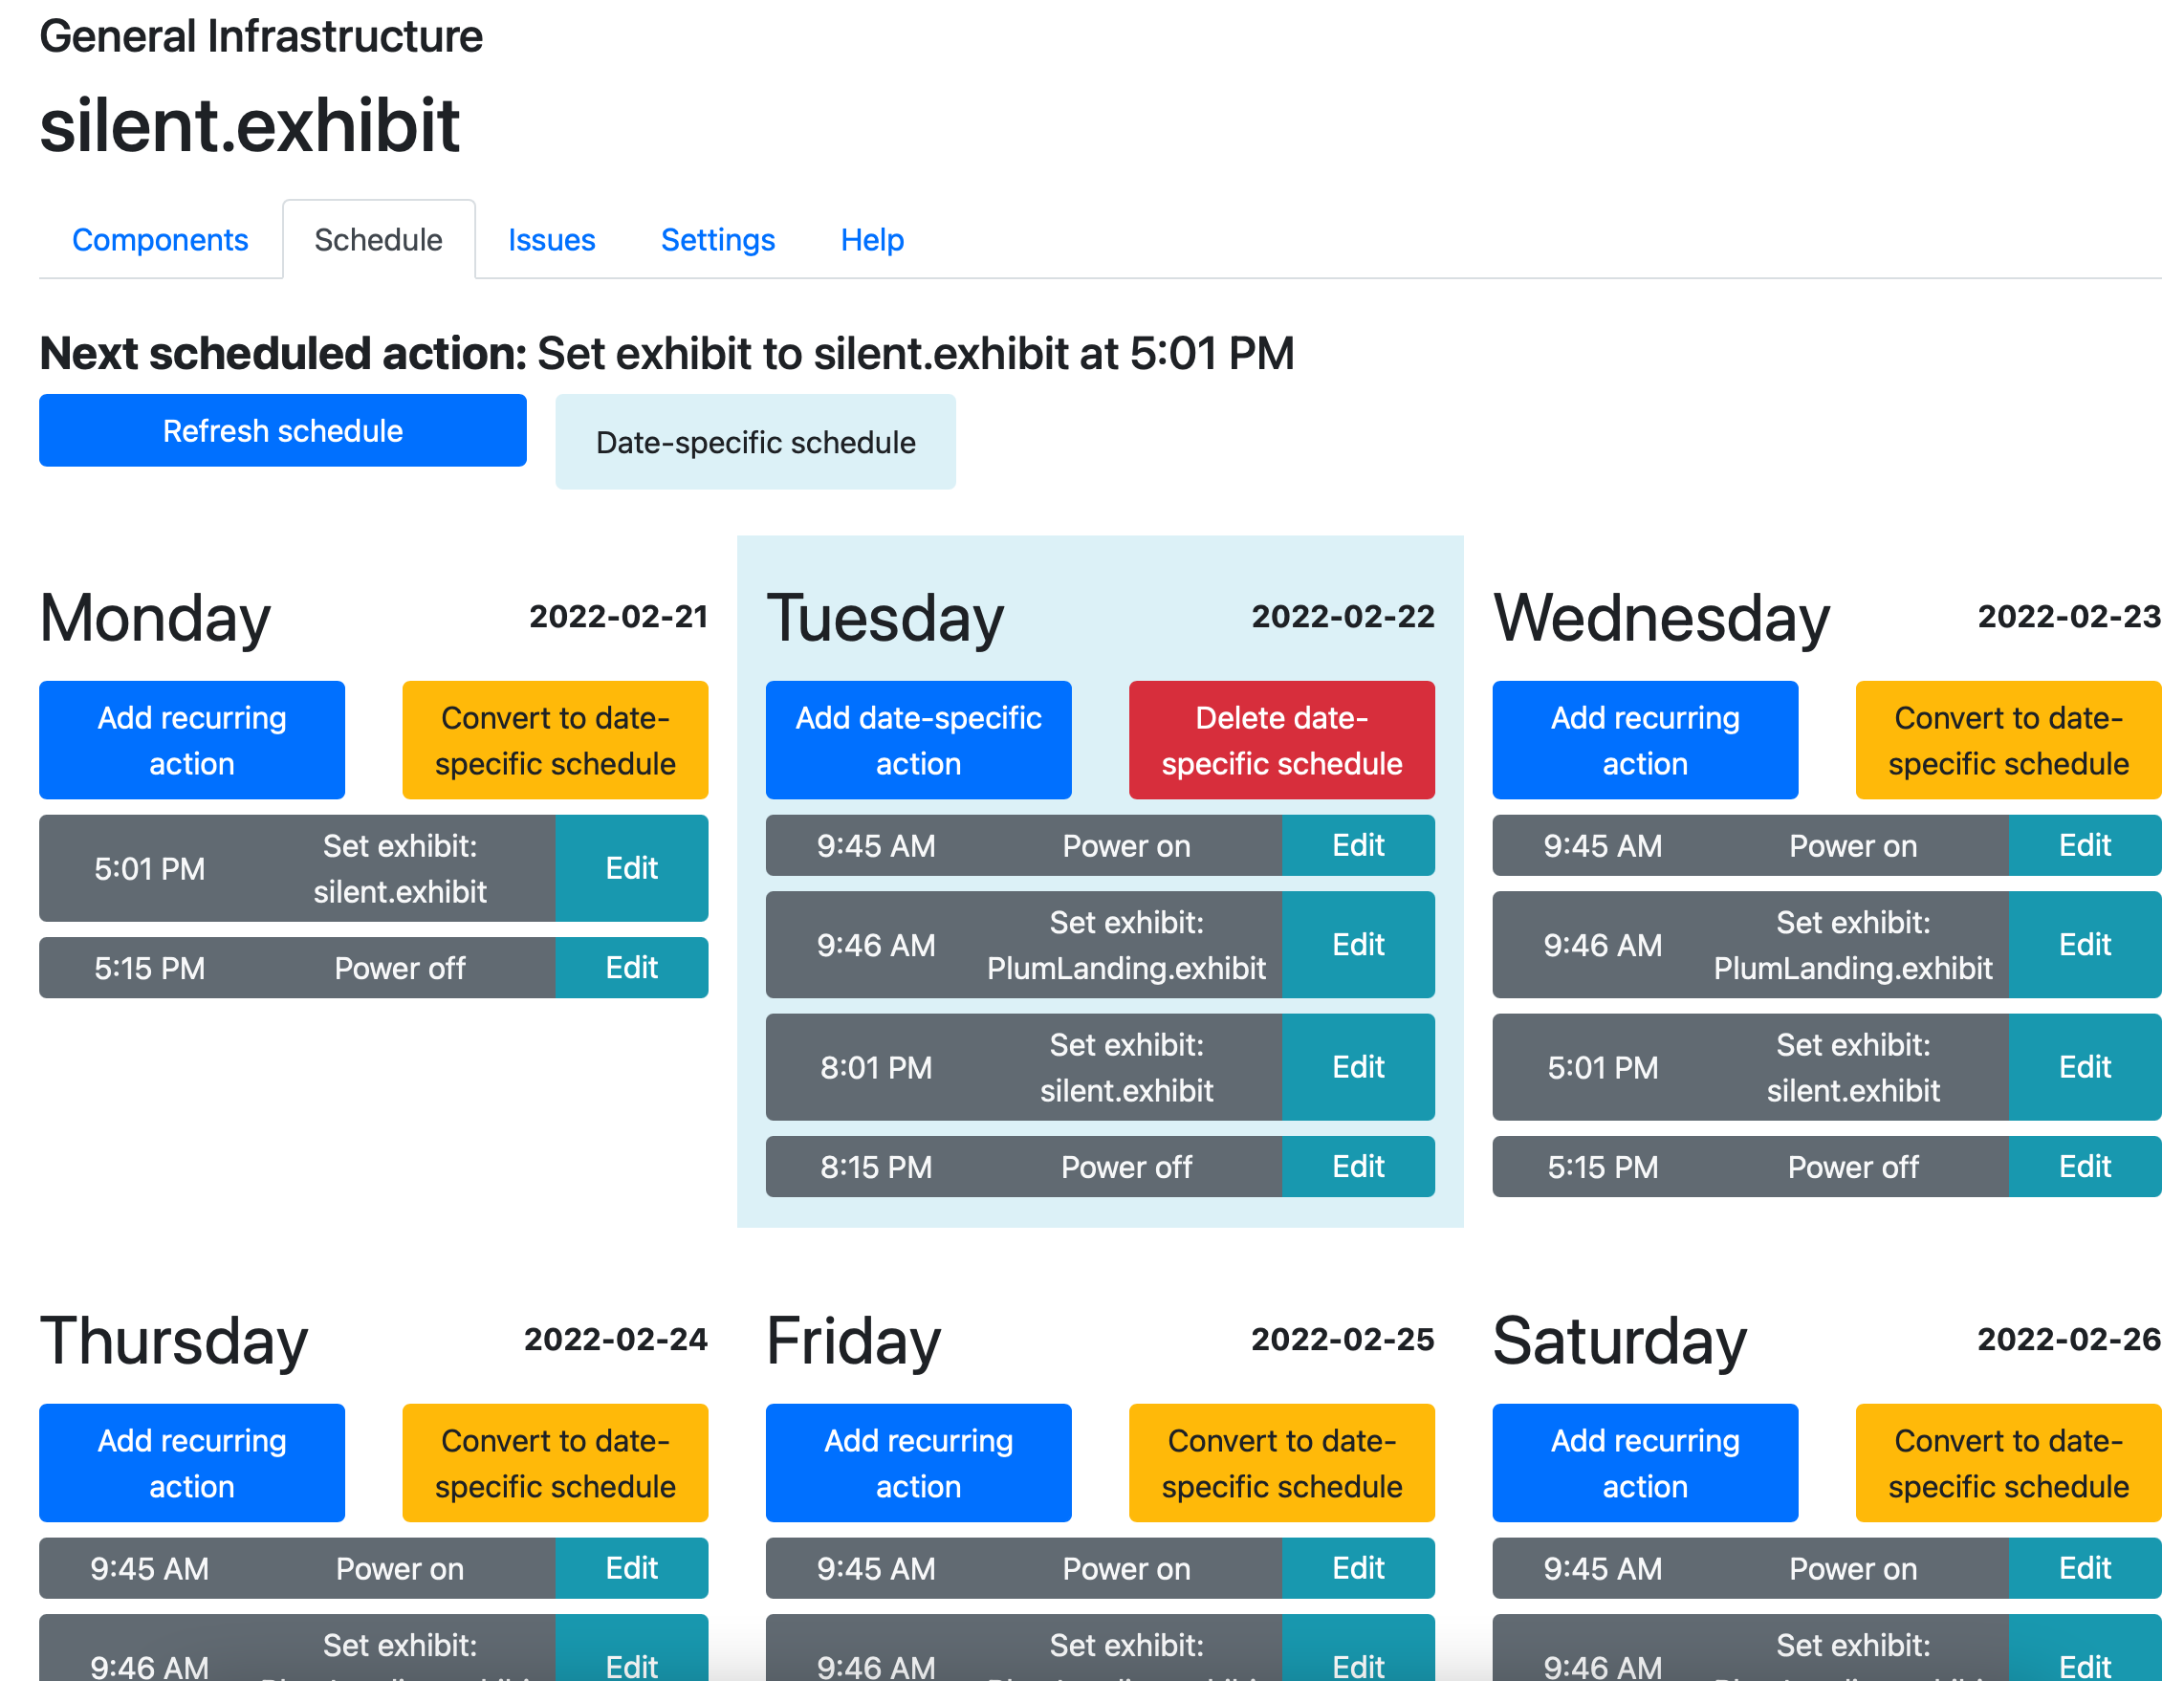 An image of the control server schedule view.